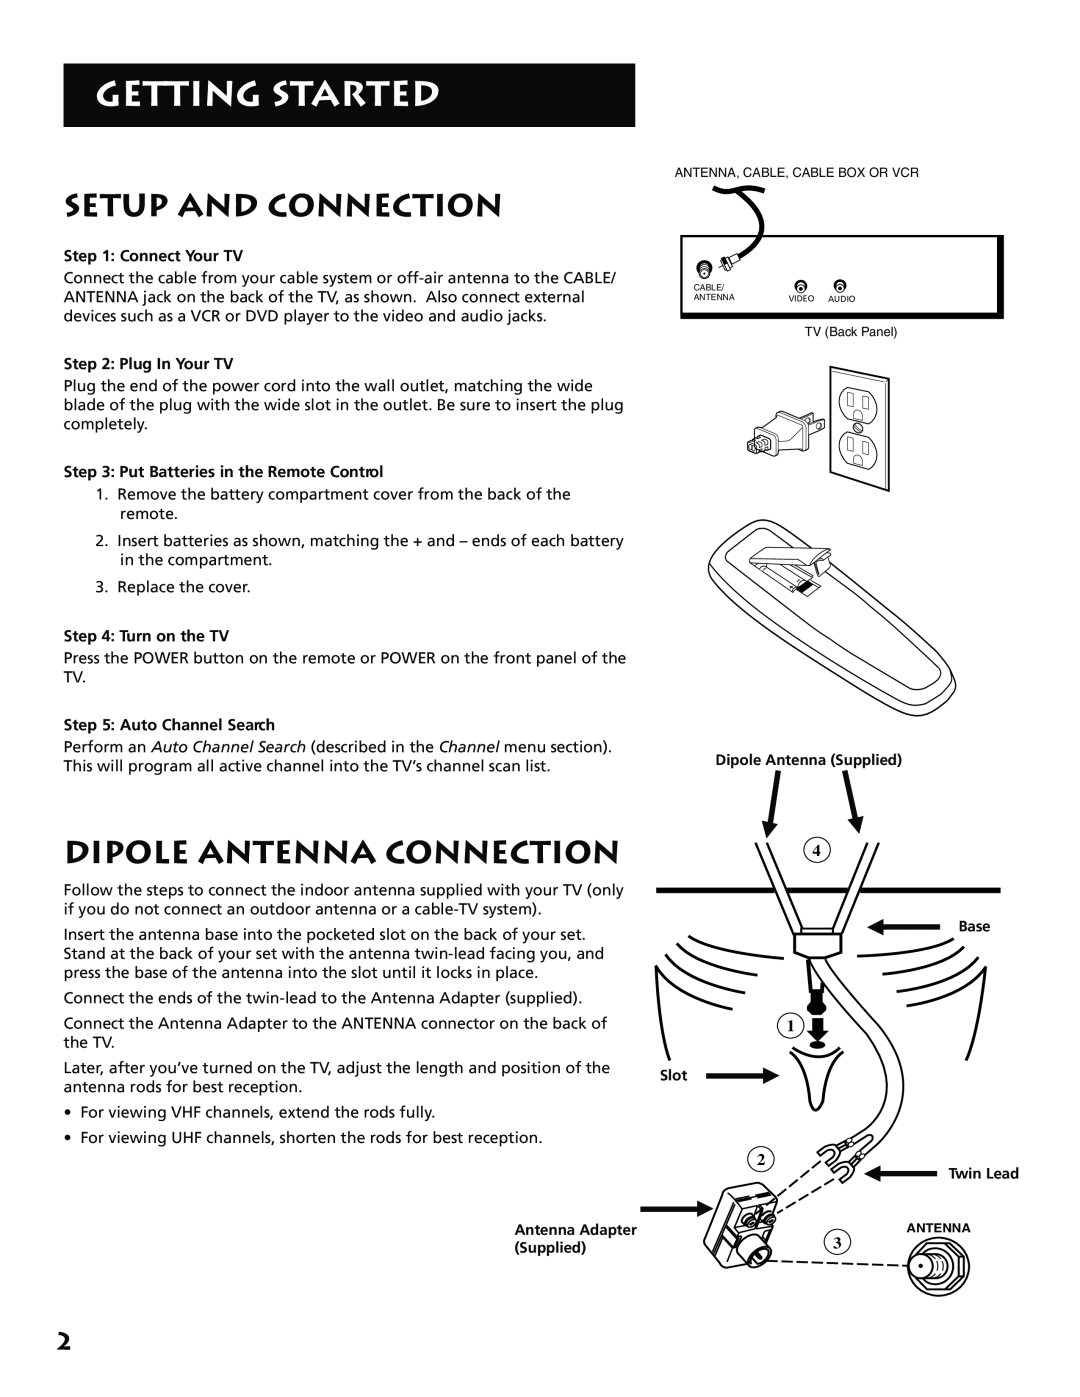 RCA E13341 manual Getting Started, Setup And Connection, Dipole Antenna Connection, Connect Your TV, Plug In Your TV 